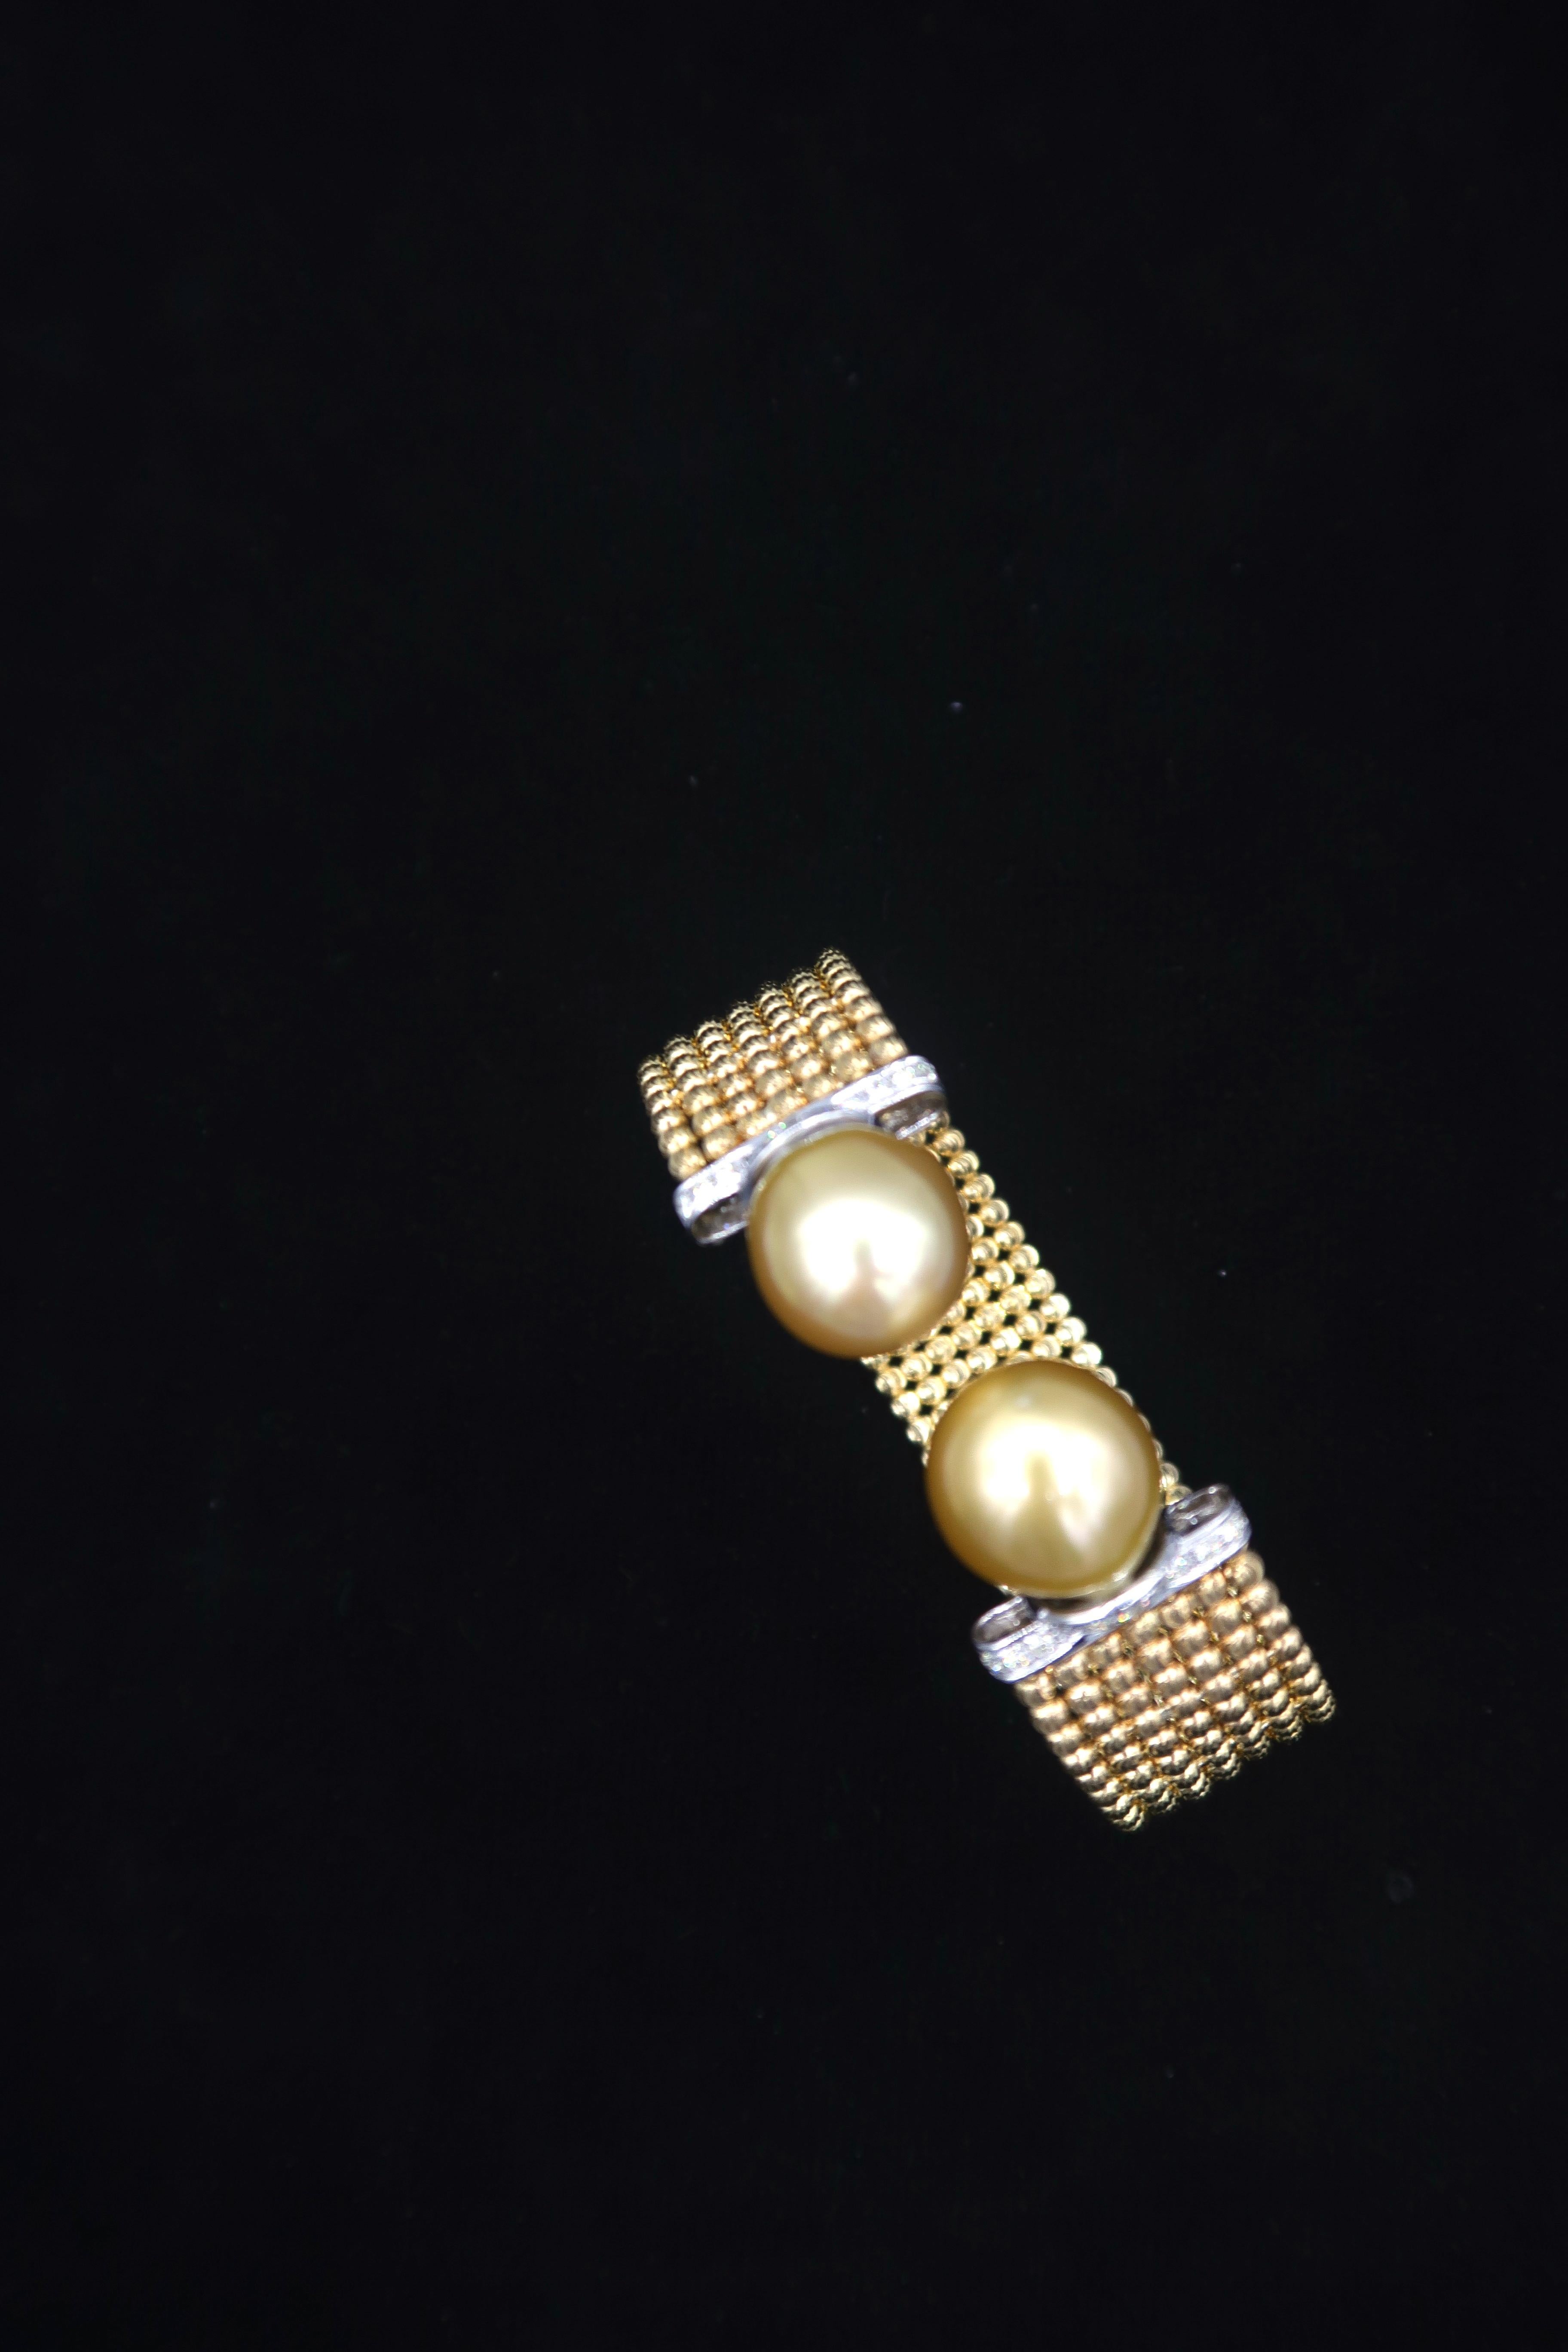 Brilliant Cut Easy-to-Wear Spring Open Bangle in 18K Gold w/ Diamonds & Gold South Sea Pearls For Sale